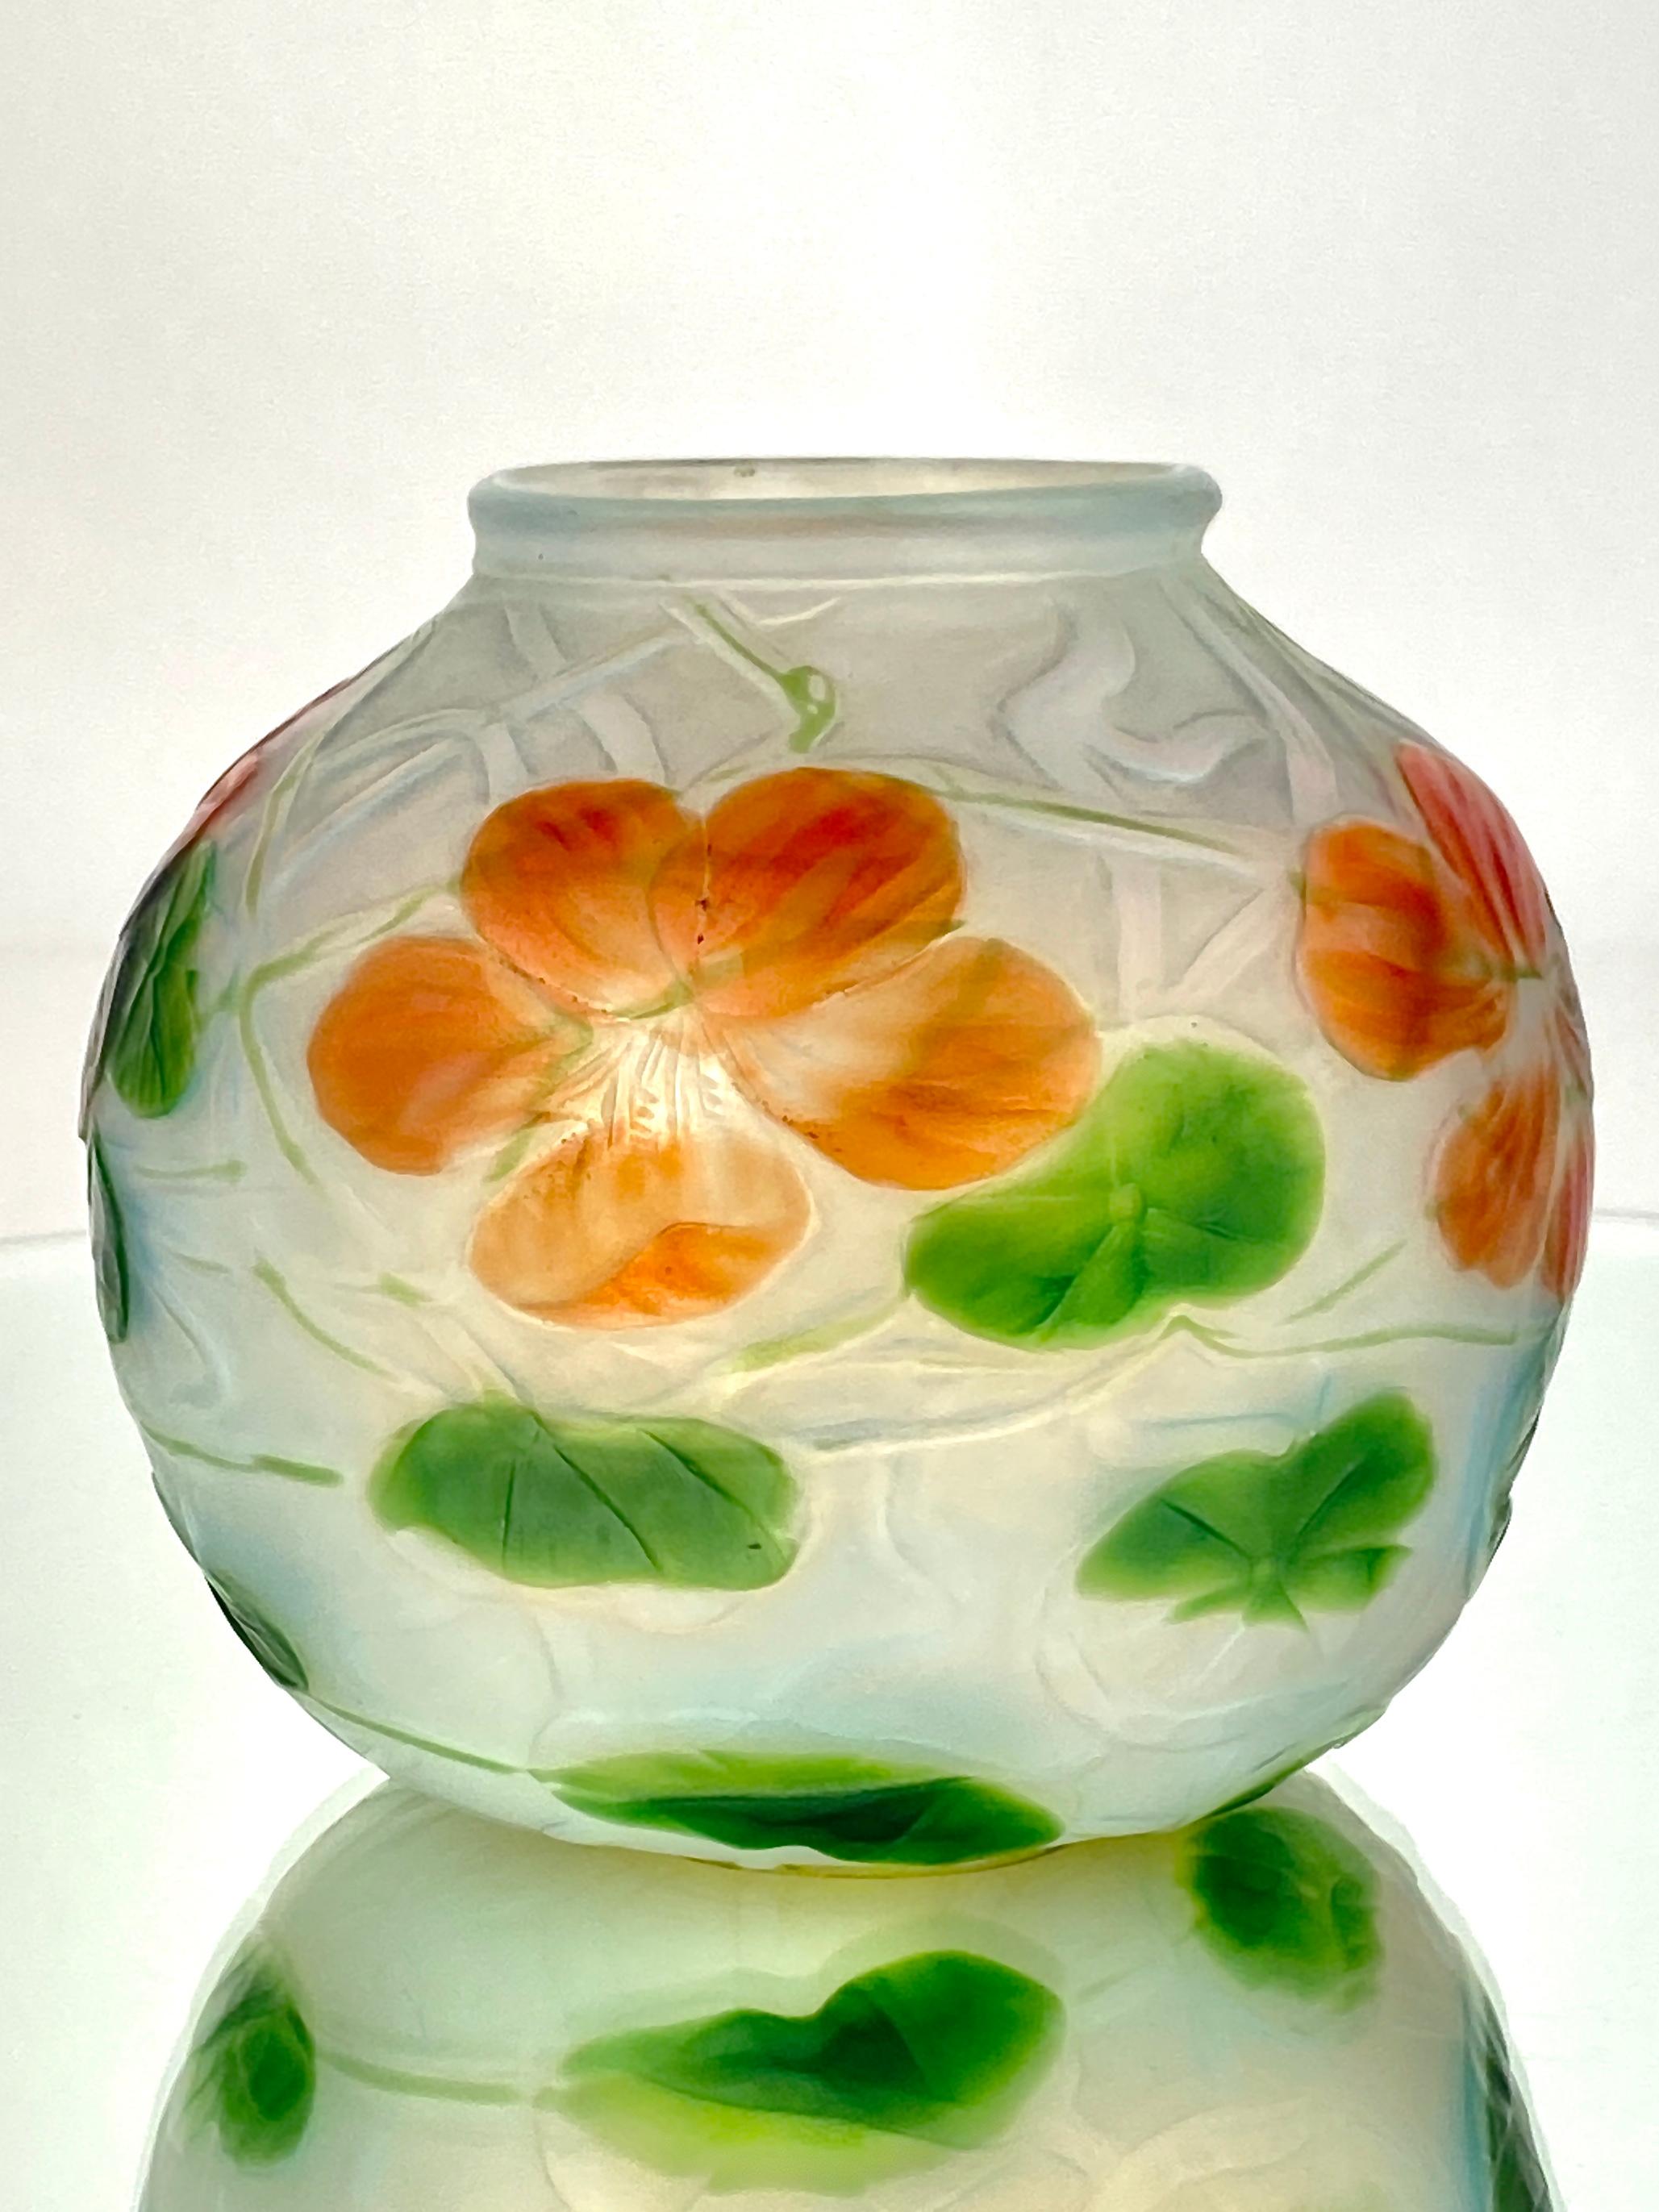 An American Art Nouveau blown glass Tiffany Favrile wheel-carved Nasturtium vase by, Tiffany Studios. The vase is round shaped and features a band of orange-red nasturtiums and green lily pads and vine decoration against an opalescent carved glass